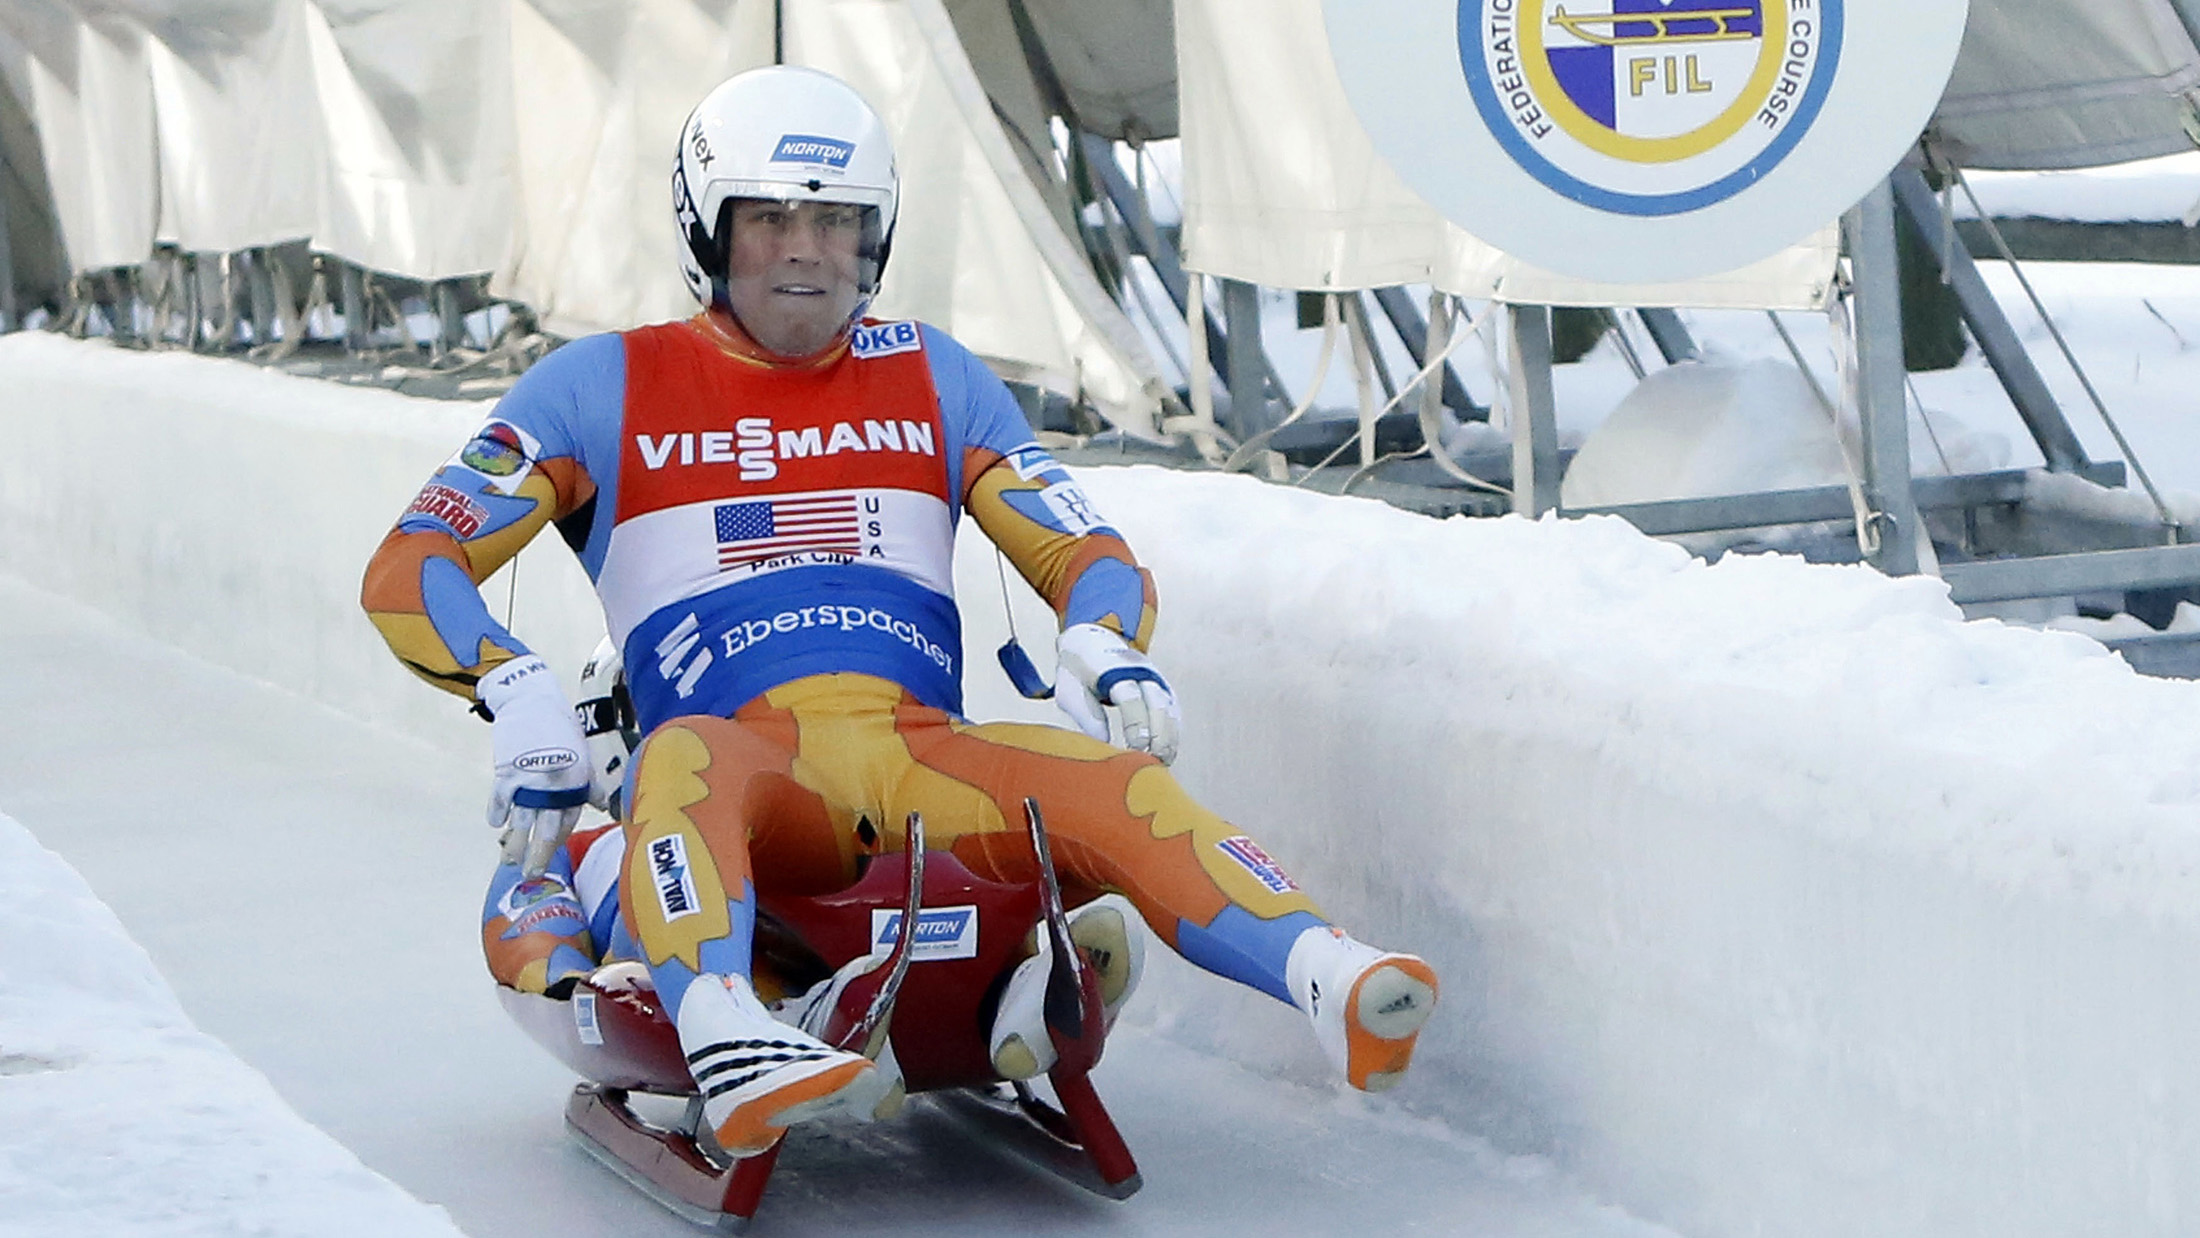 Nice Images Collection: Luge Desktop Wallpapers